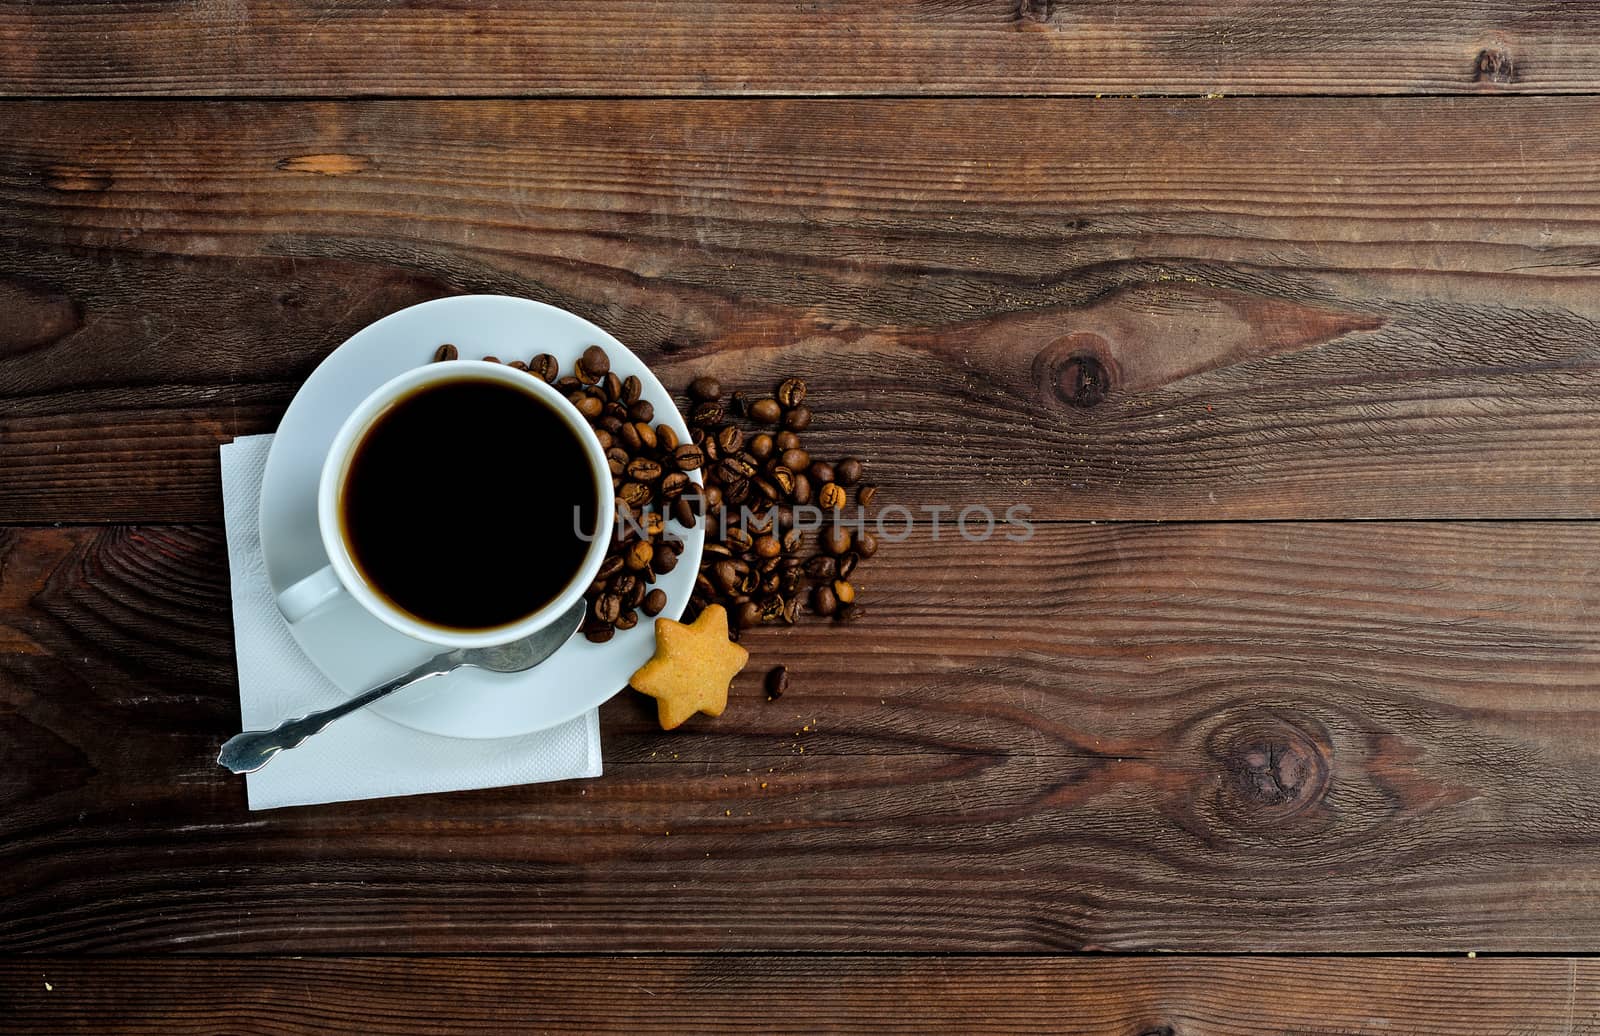 A cup of coffee, coffee beans and one star cookies on wood background